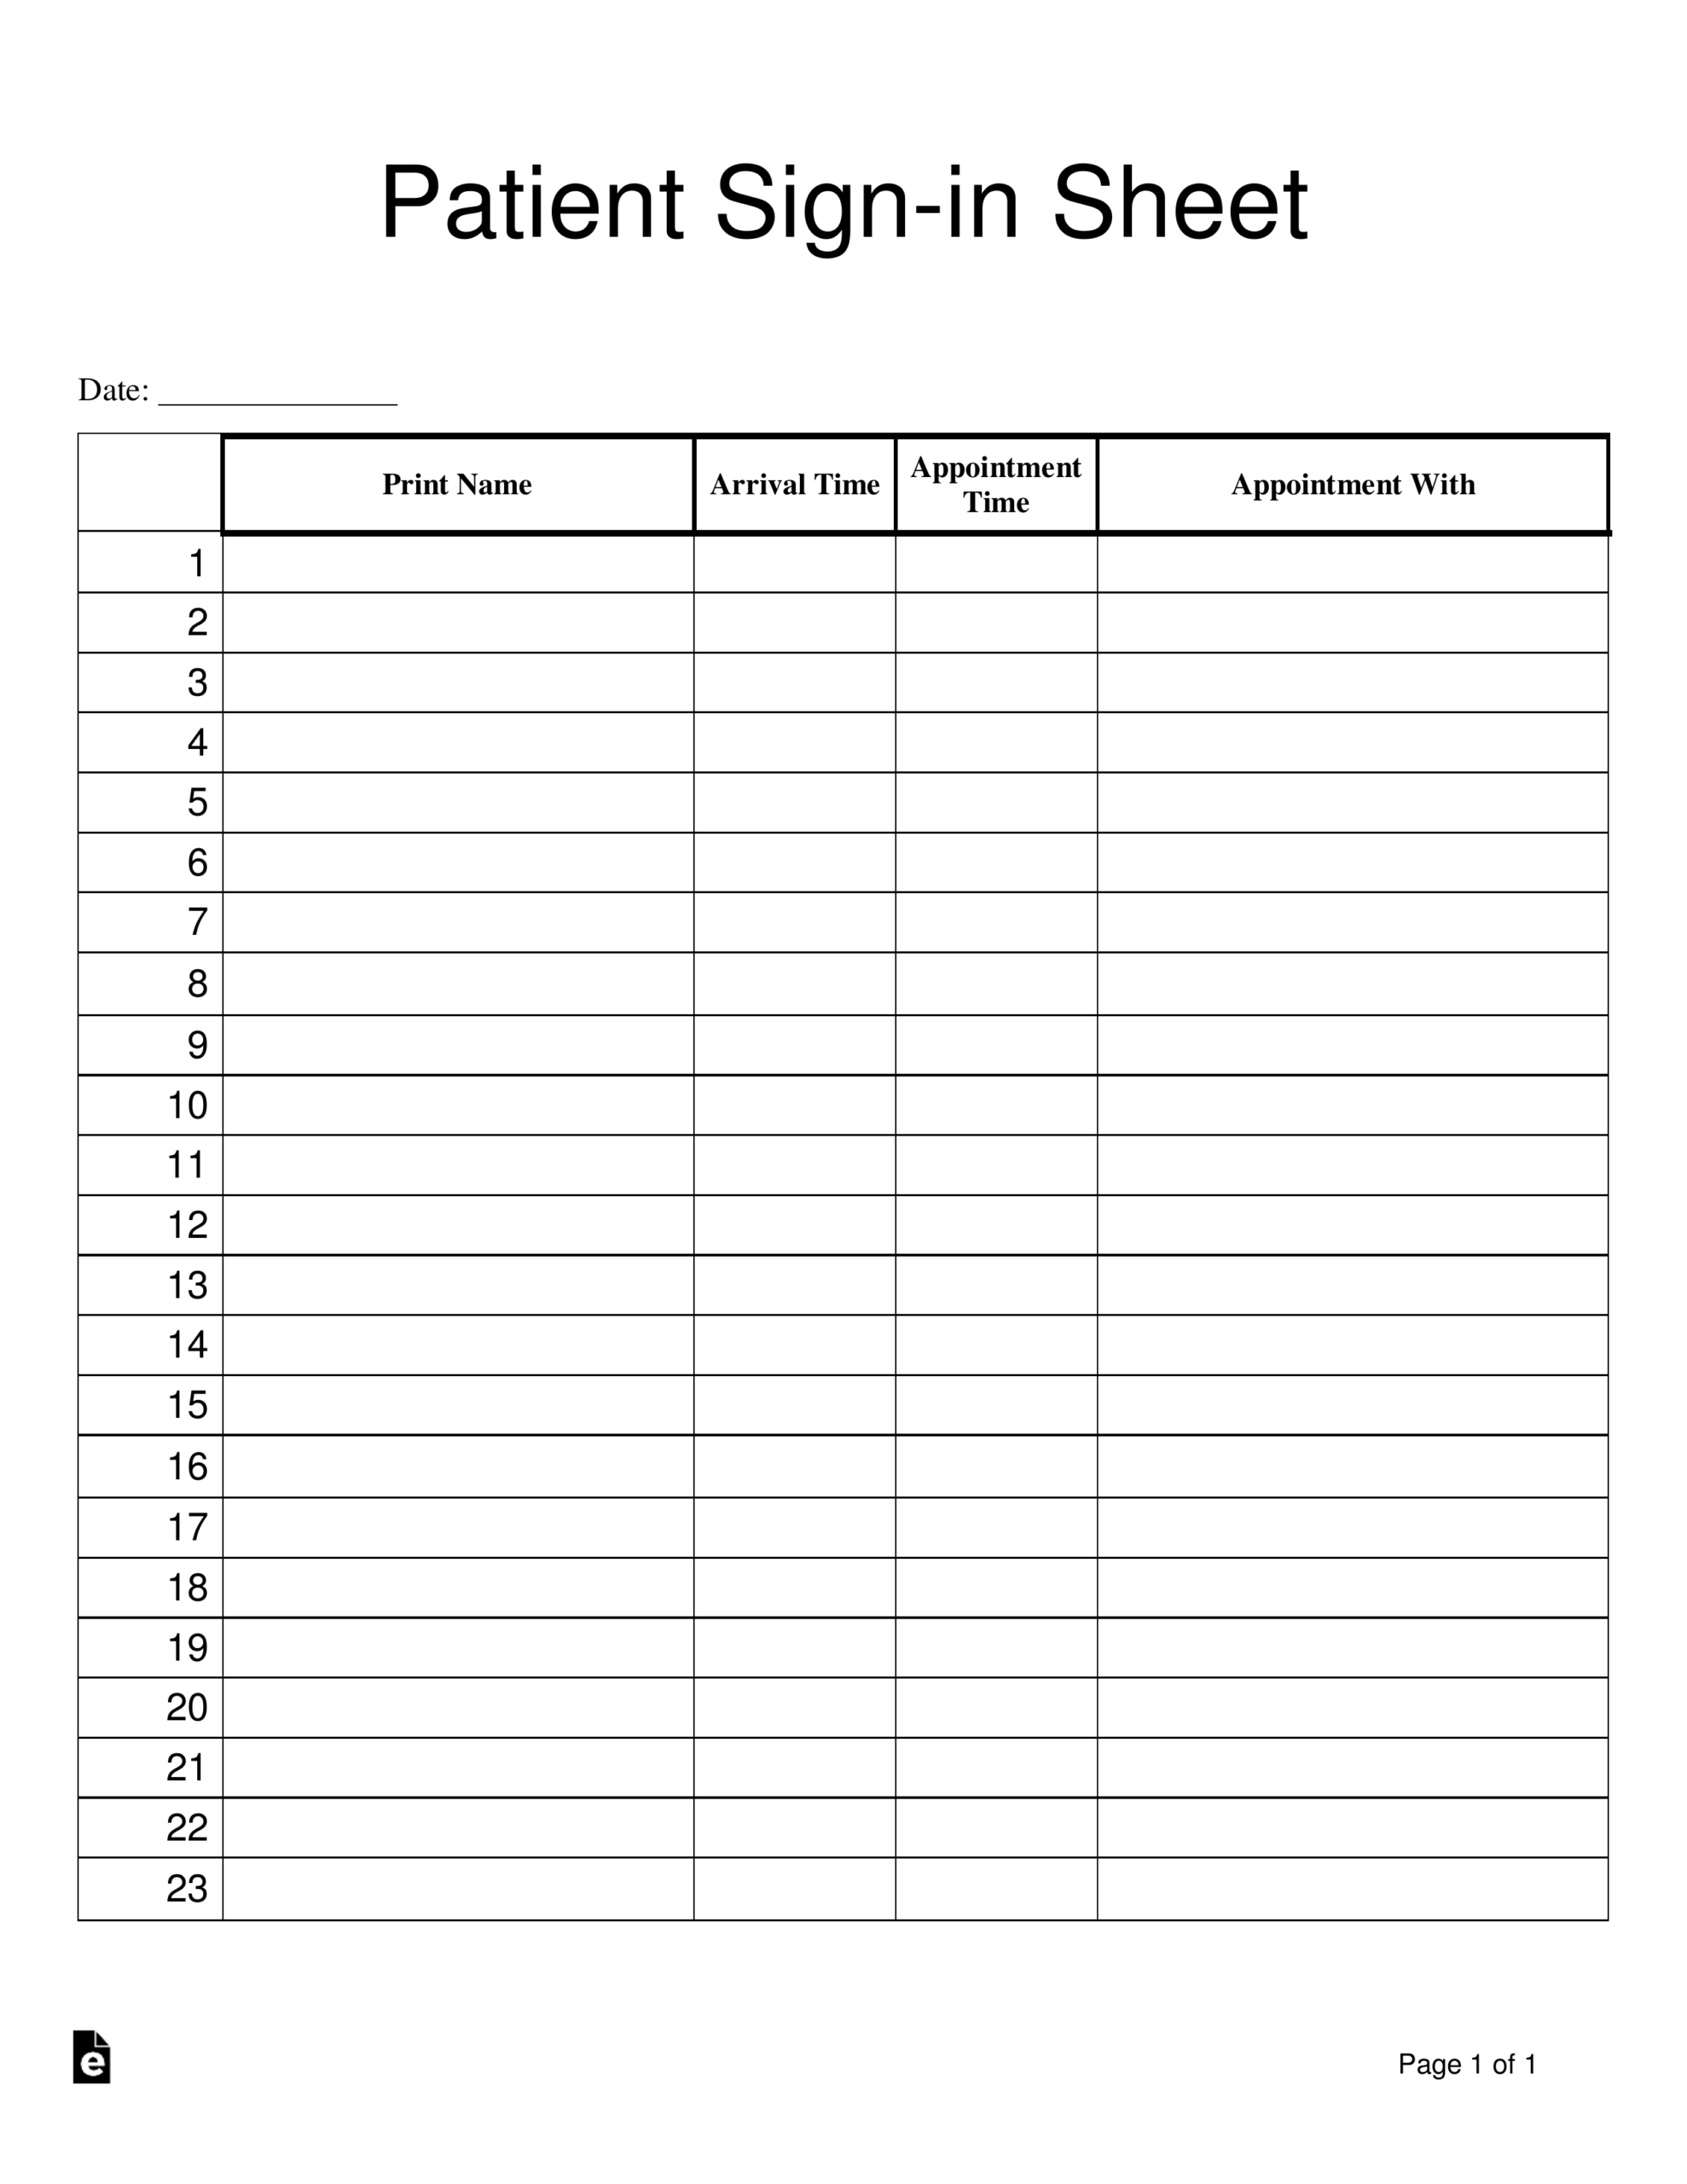 Patient Sign In Sheet Template | Eforms – Free Fillable Forms Inside Appointment Sheet Template Word